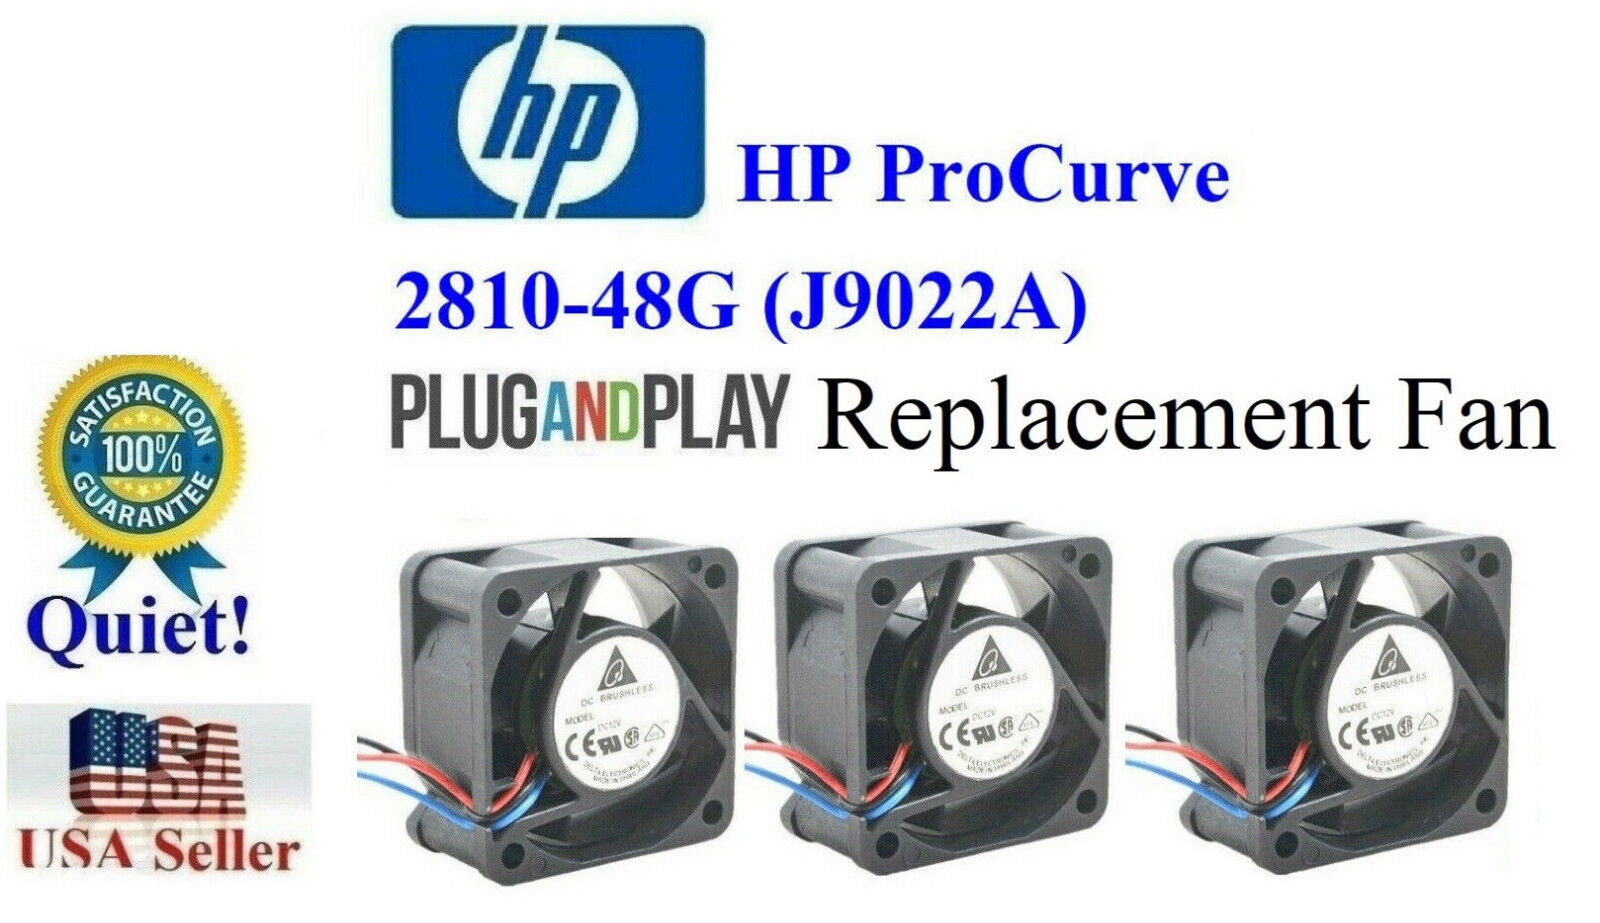 Lot 3x Quiet Fans for HP ProCurve 2810-48G (J9022A) Best for Home Networking